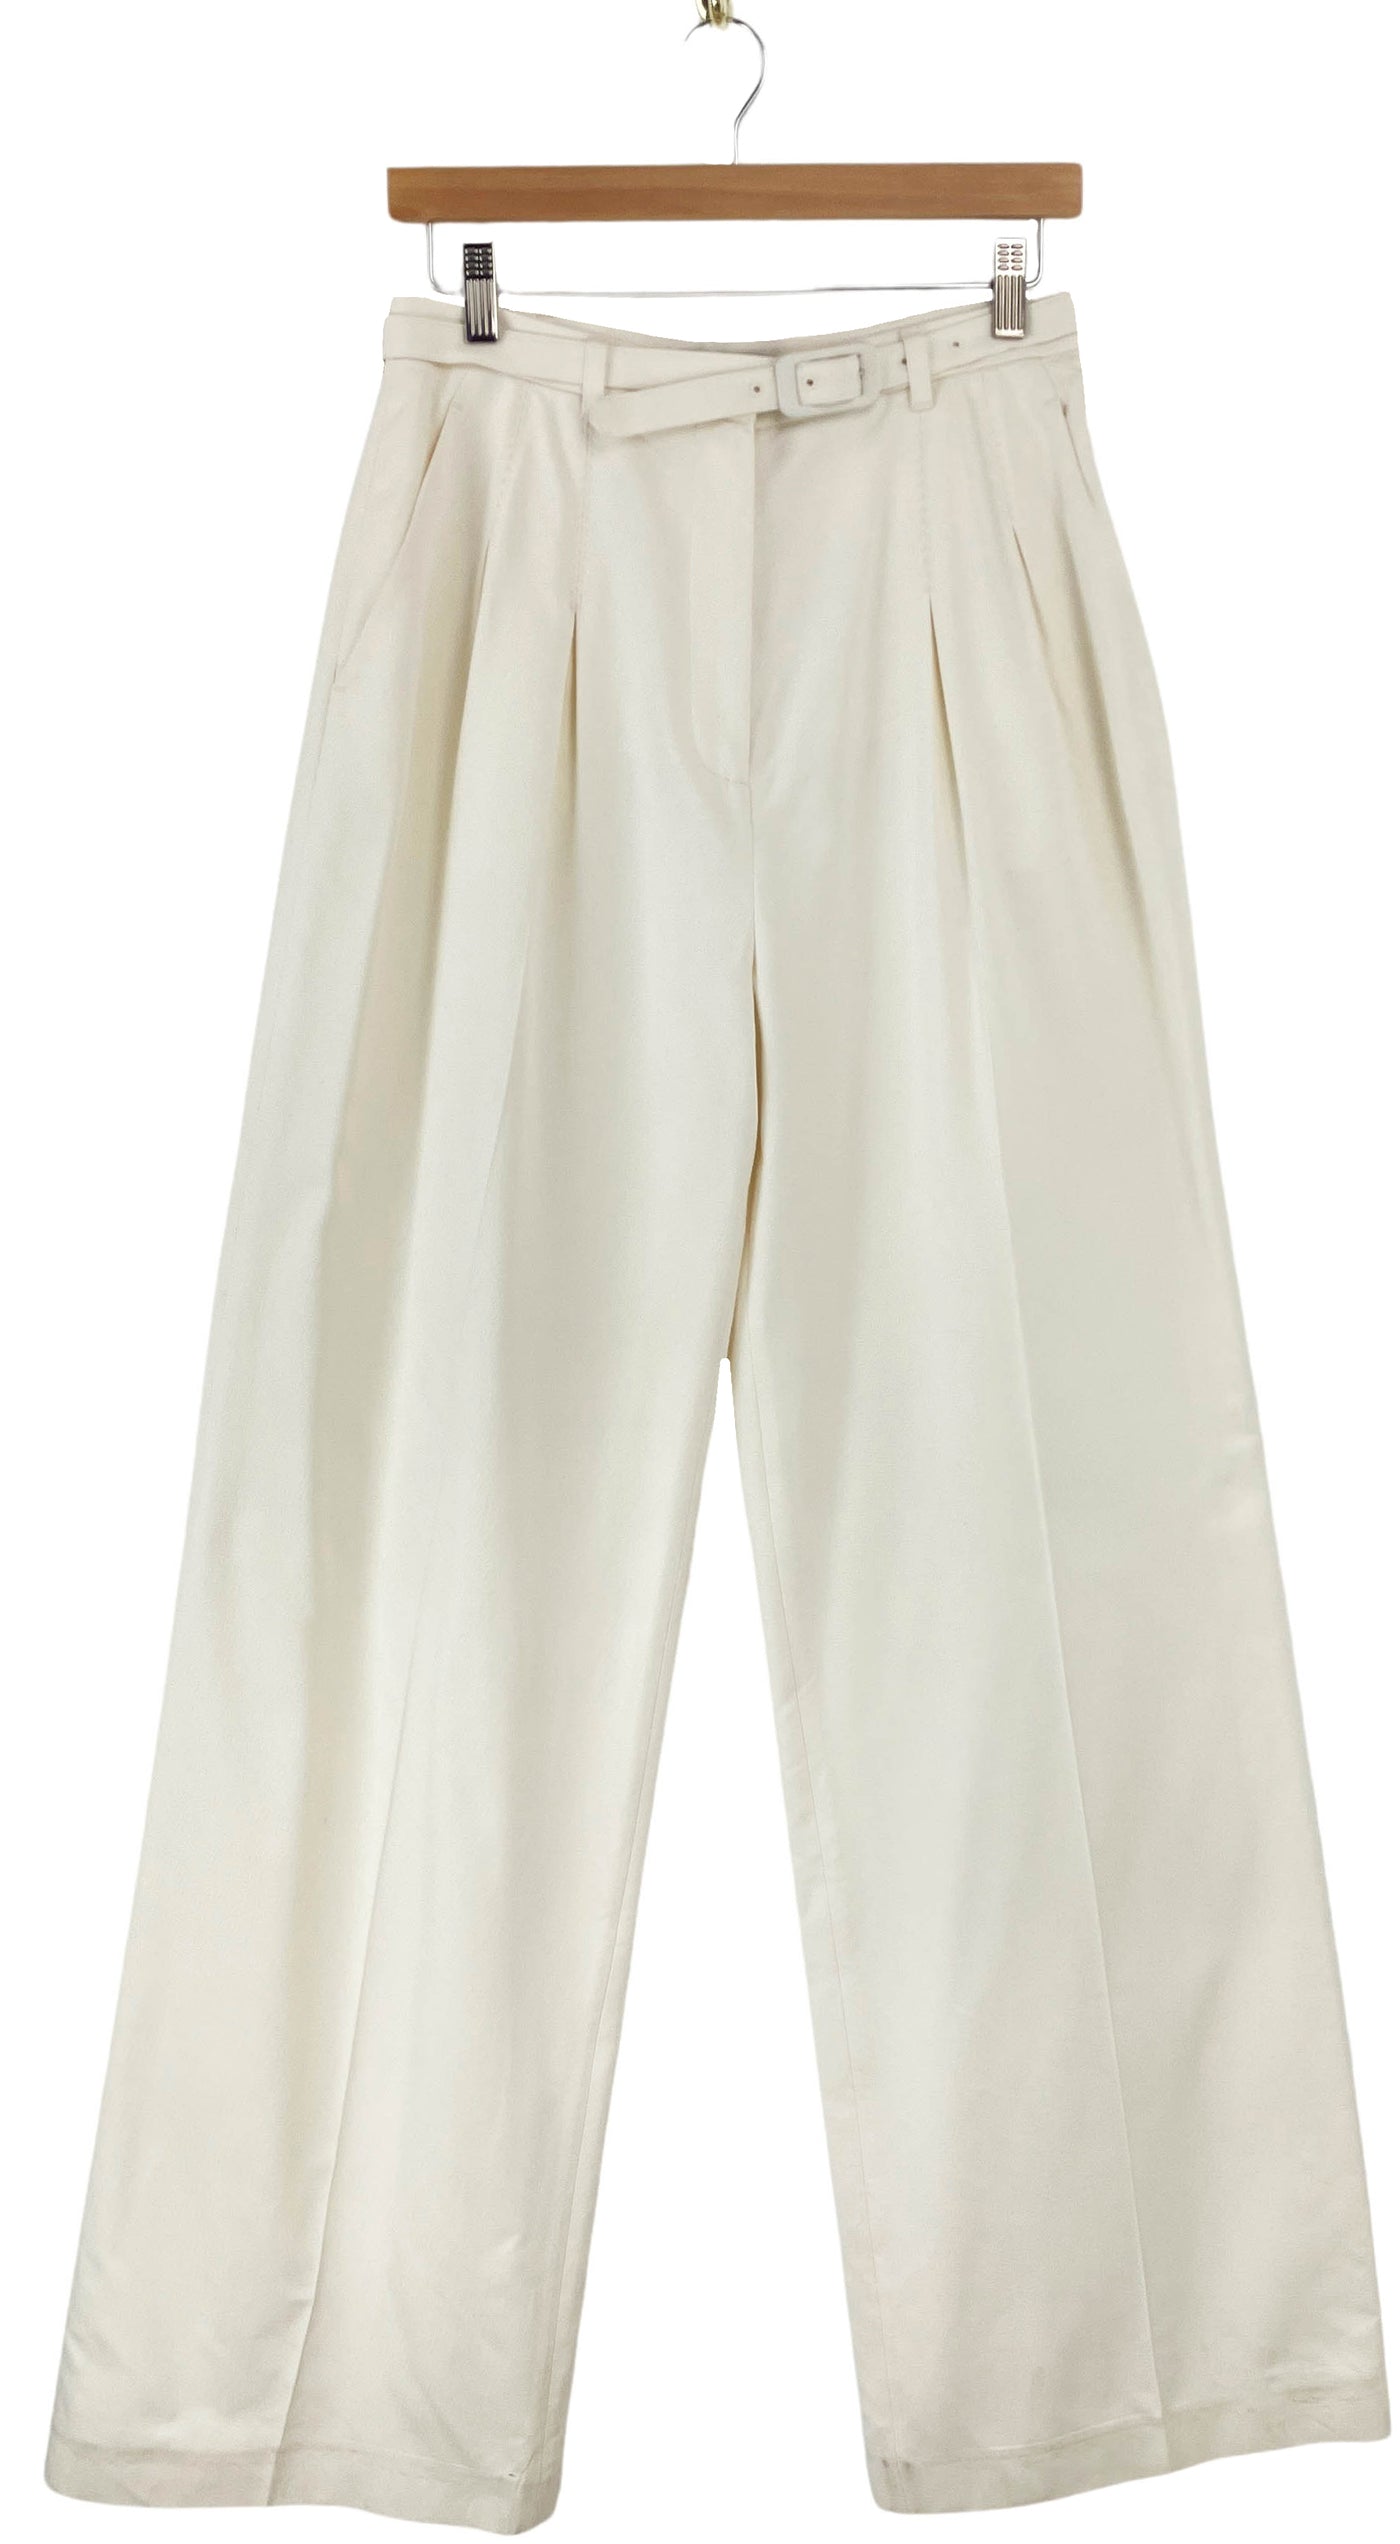 Gabriela Hearst Vargas Trousers in Off White - Discounts on Gabriela Hearst at UAL